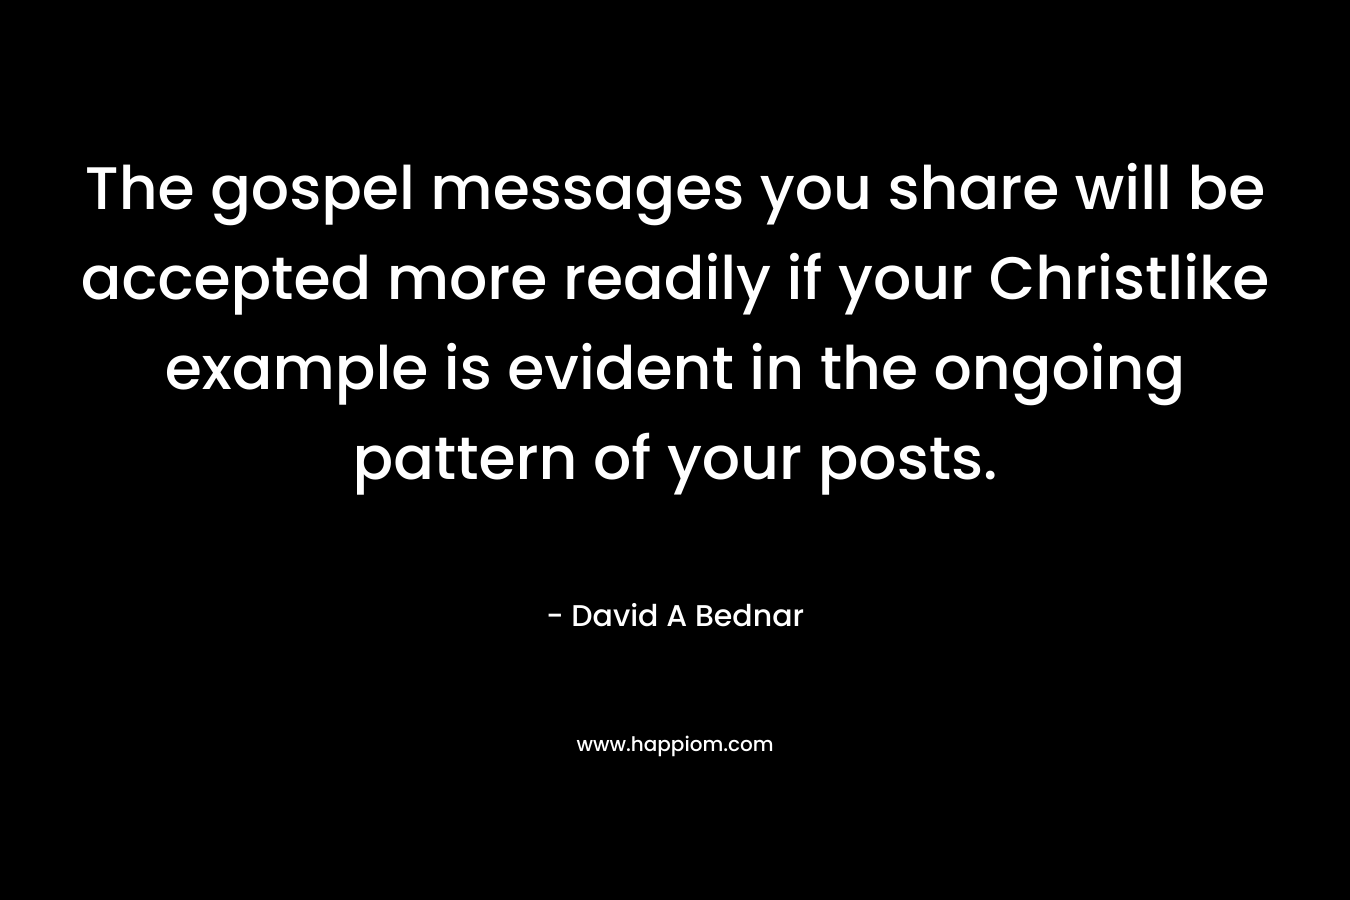 The gospel messages you share will be accepted more readily if your Christlike example is evident in the ongoing pattern of your posts.